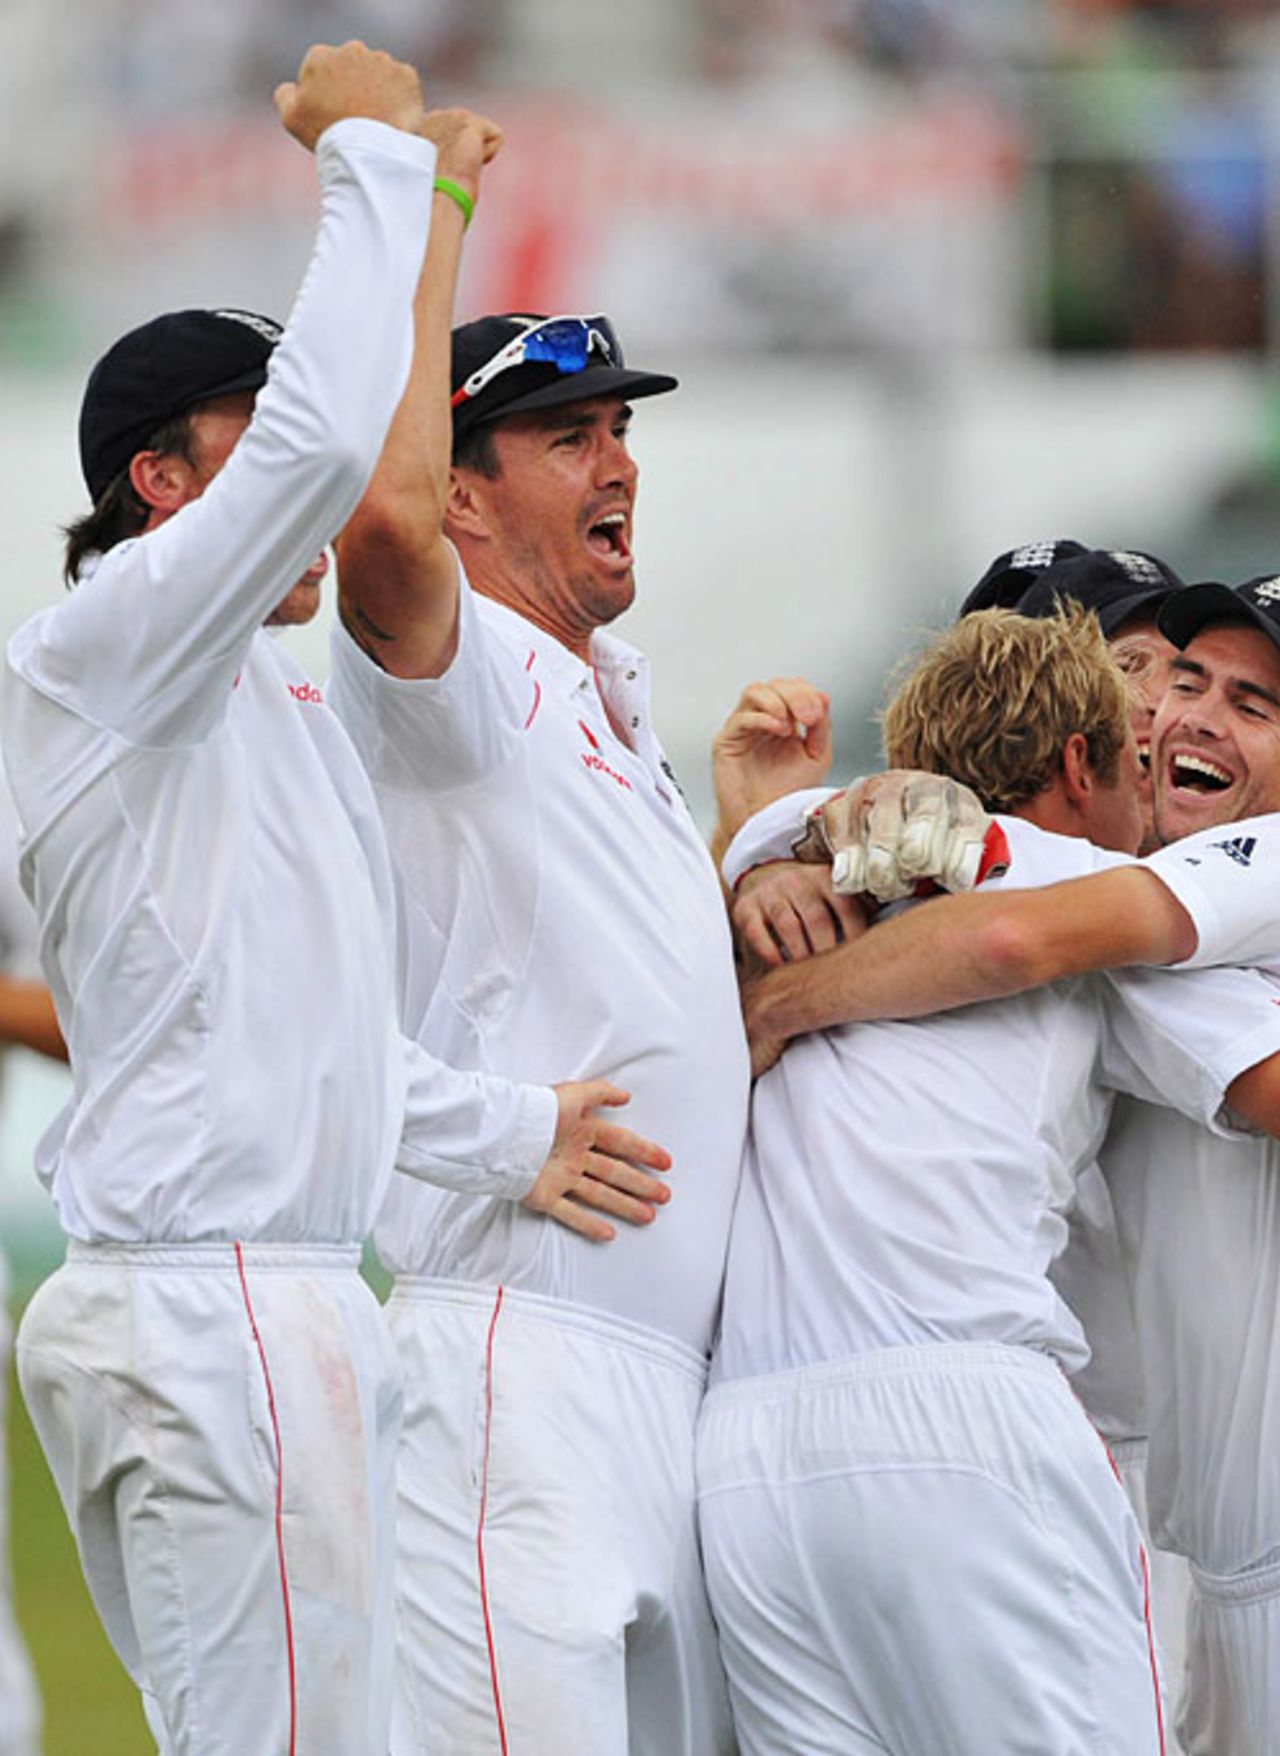 England were elated as the wickets kept tumbling, South Africa v England, 2nd Test, Durban, December 29, 2009 